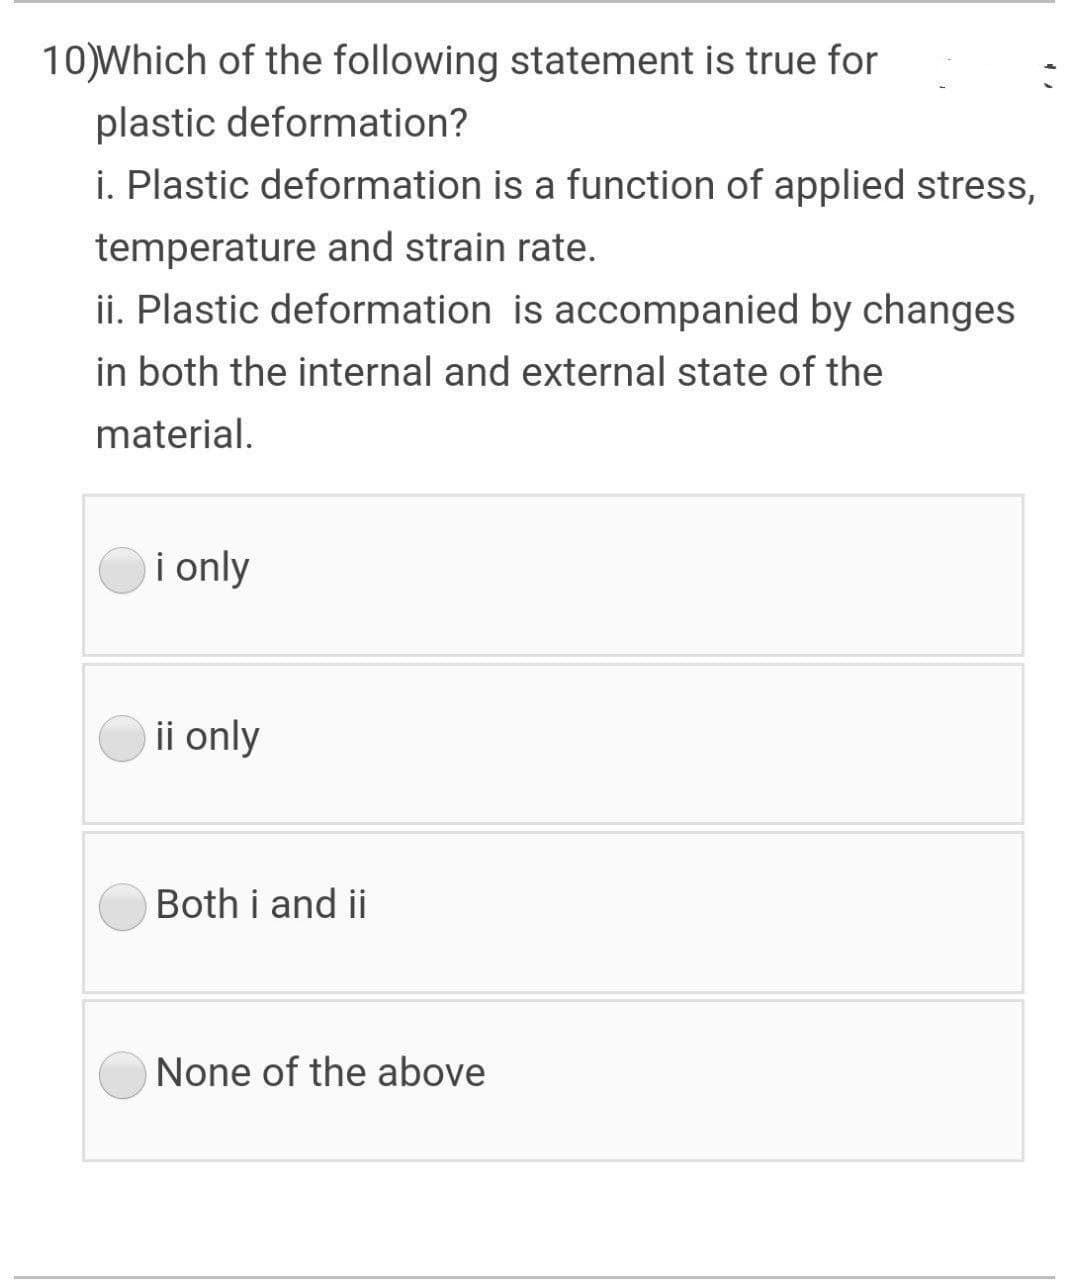 10)Which of the following statement is true for
plastic deformation?
i. Plastic deformation is a function of applied stress,
temperature and strain rate.
ii. Plastic deformation is accompanied by changes
in both the internal and external state of the
material.
i only
ii only
Both i and ii
None of the above
